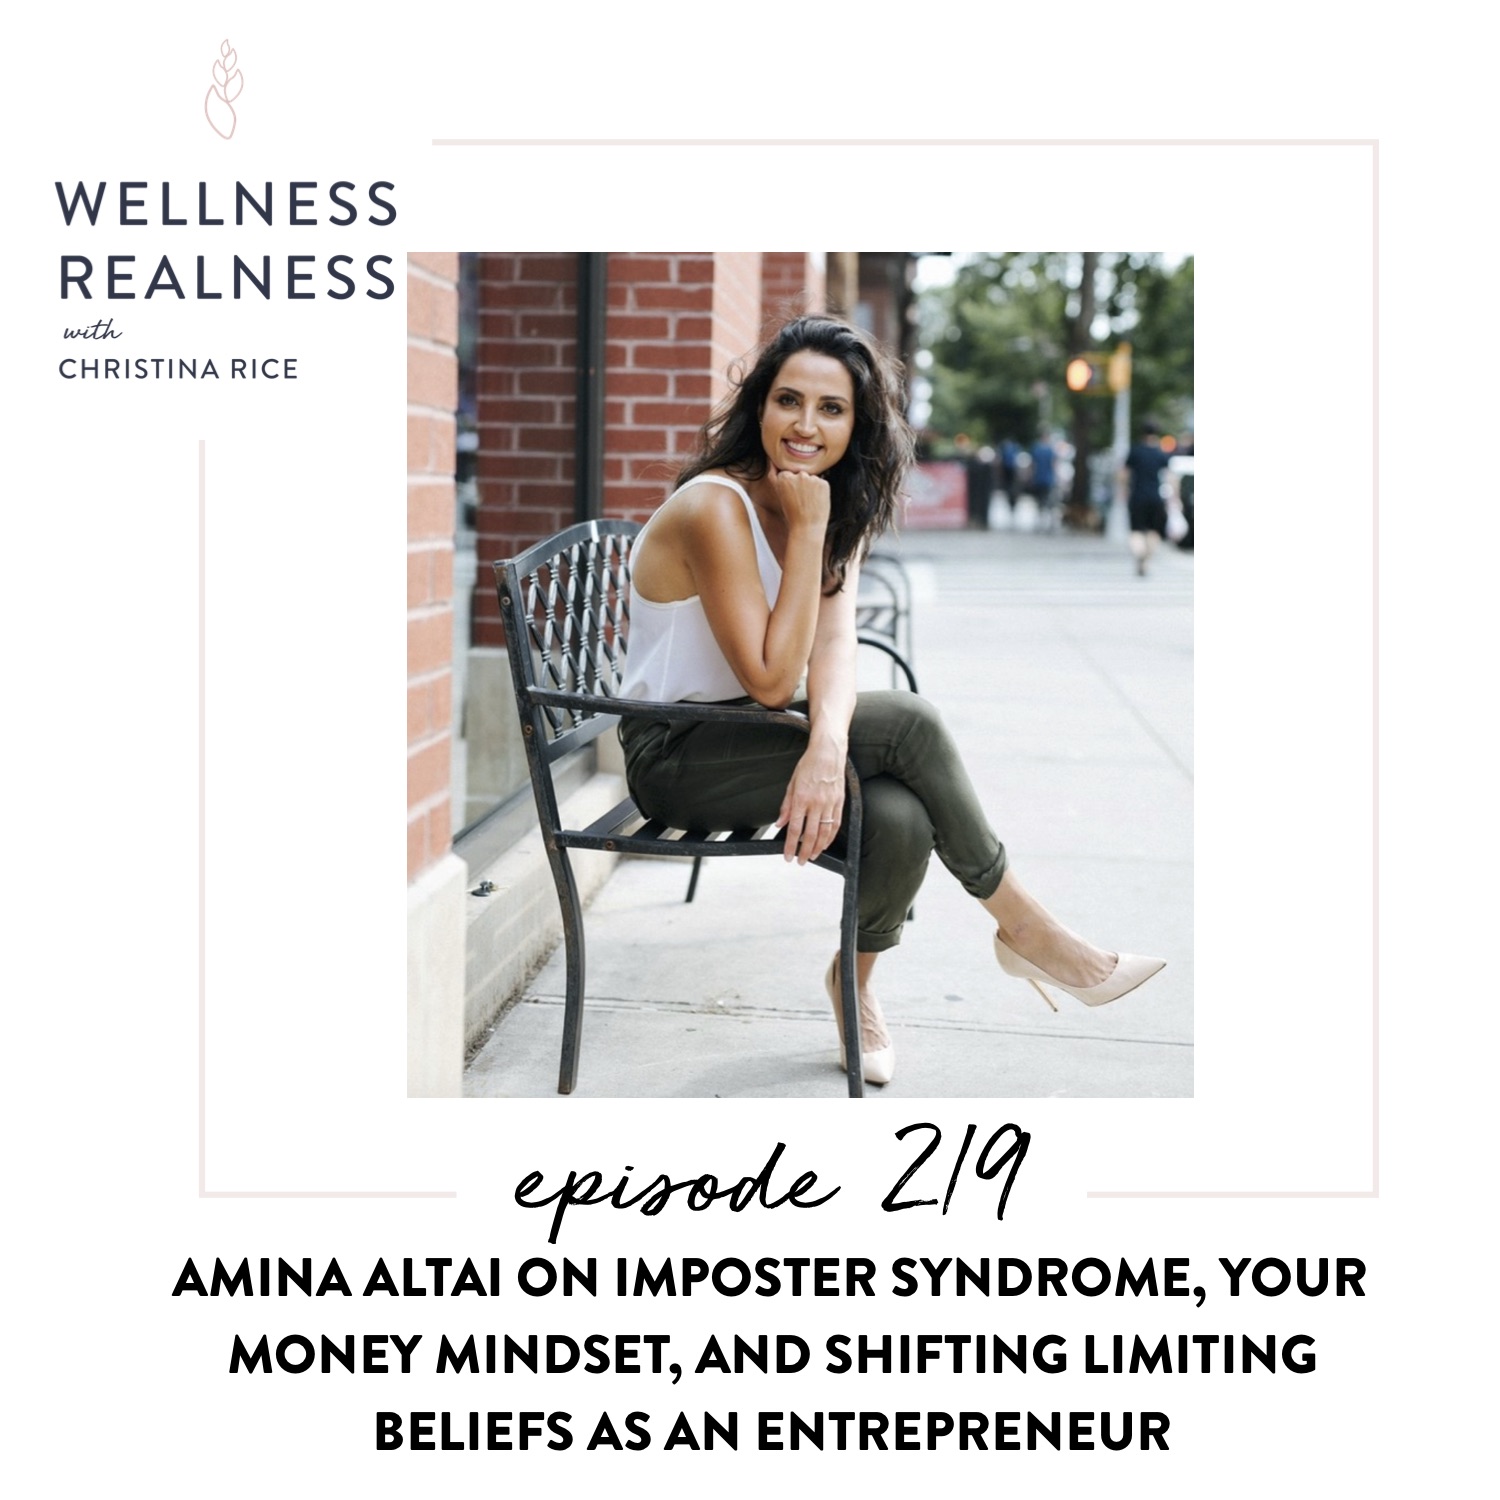 219: Amina AlTai on Imposter Syndrome, Your Money Mindset, and Shifting Limiting Beliefs as an Entrepreneur